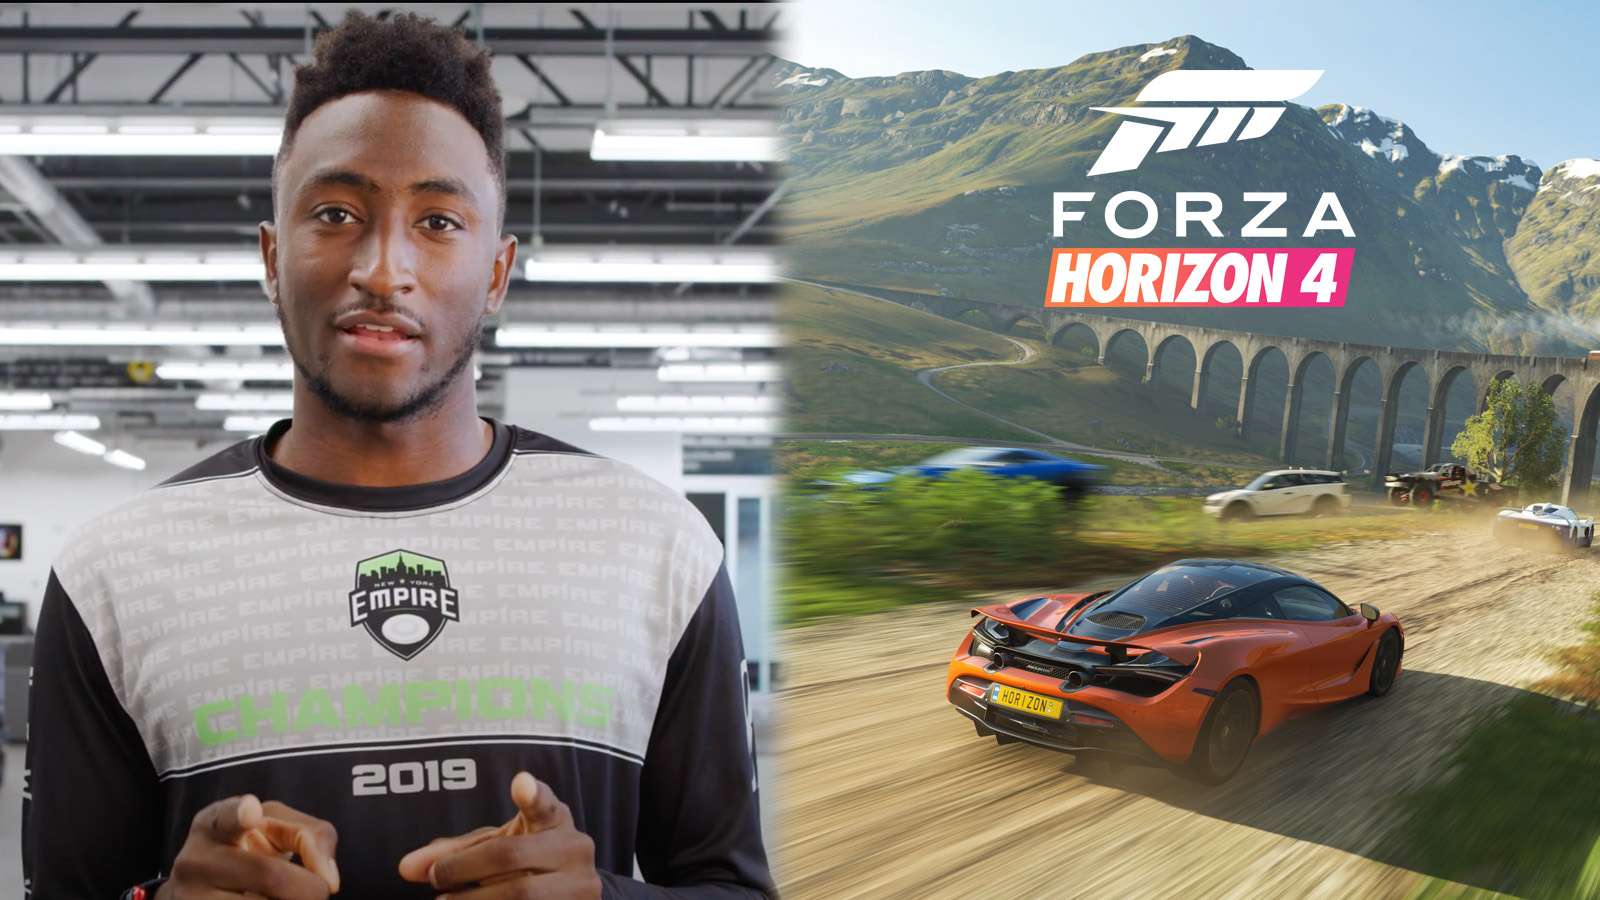 Marques Brownlee plays Forza Horizon 4 in 8K